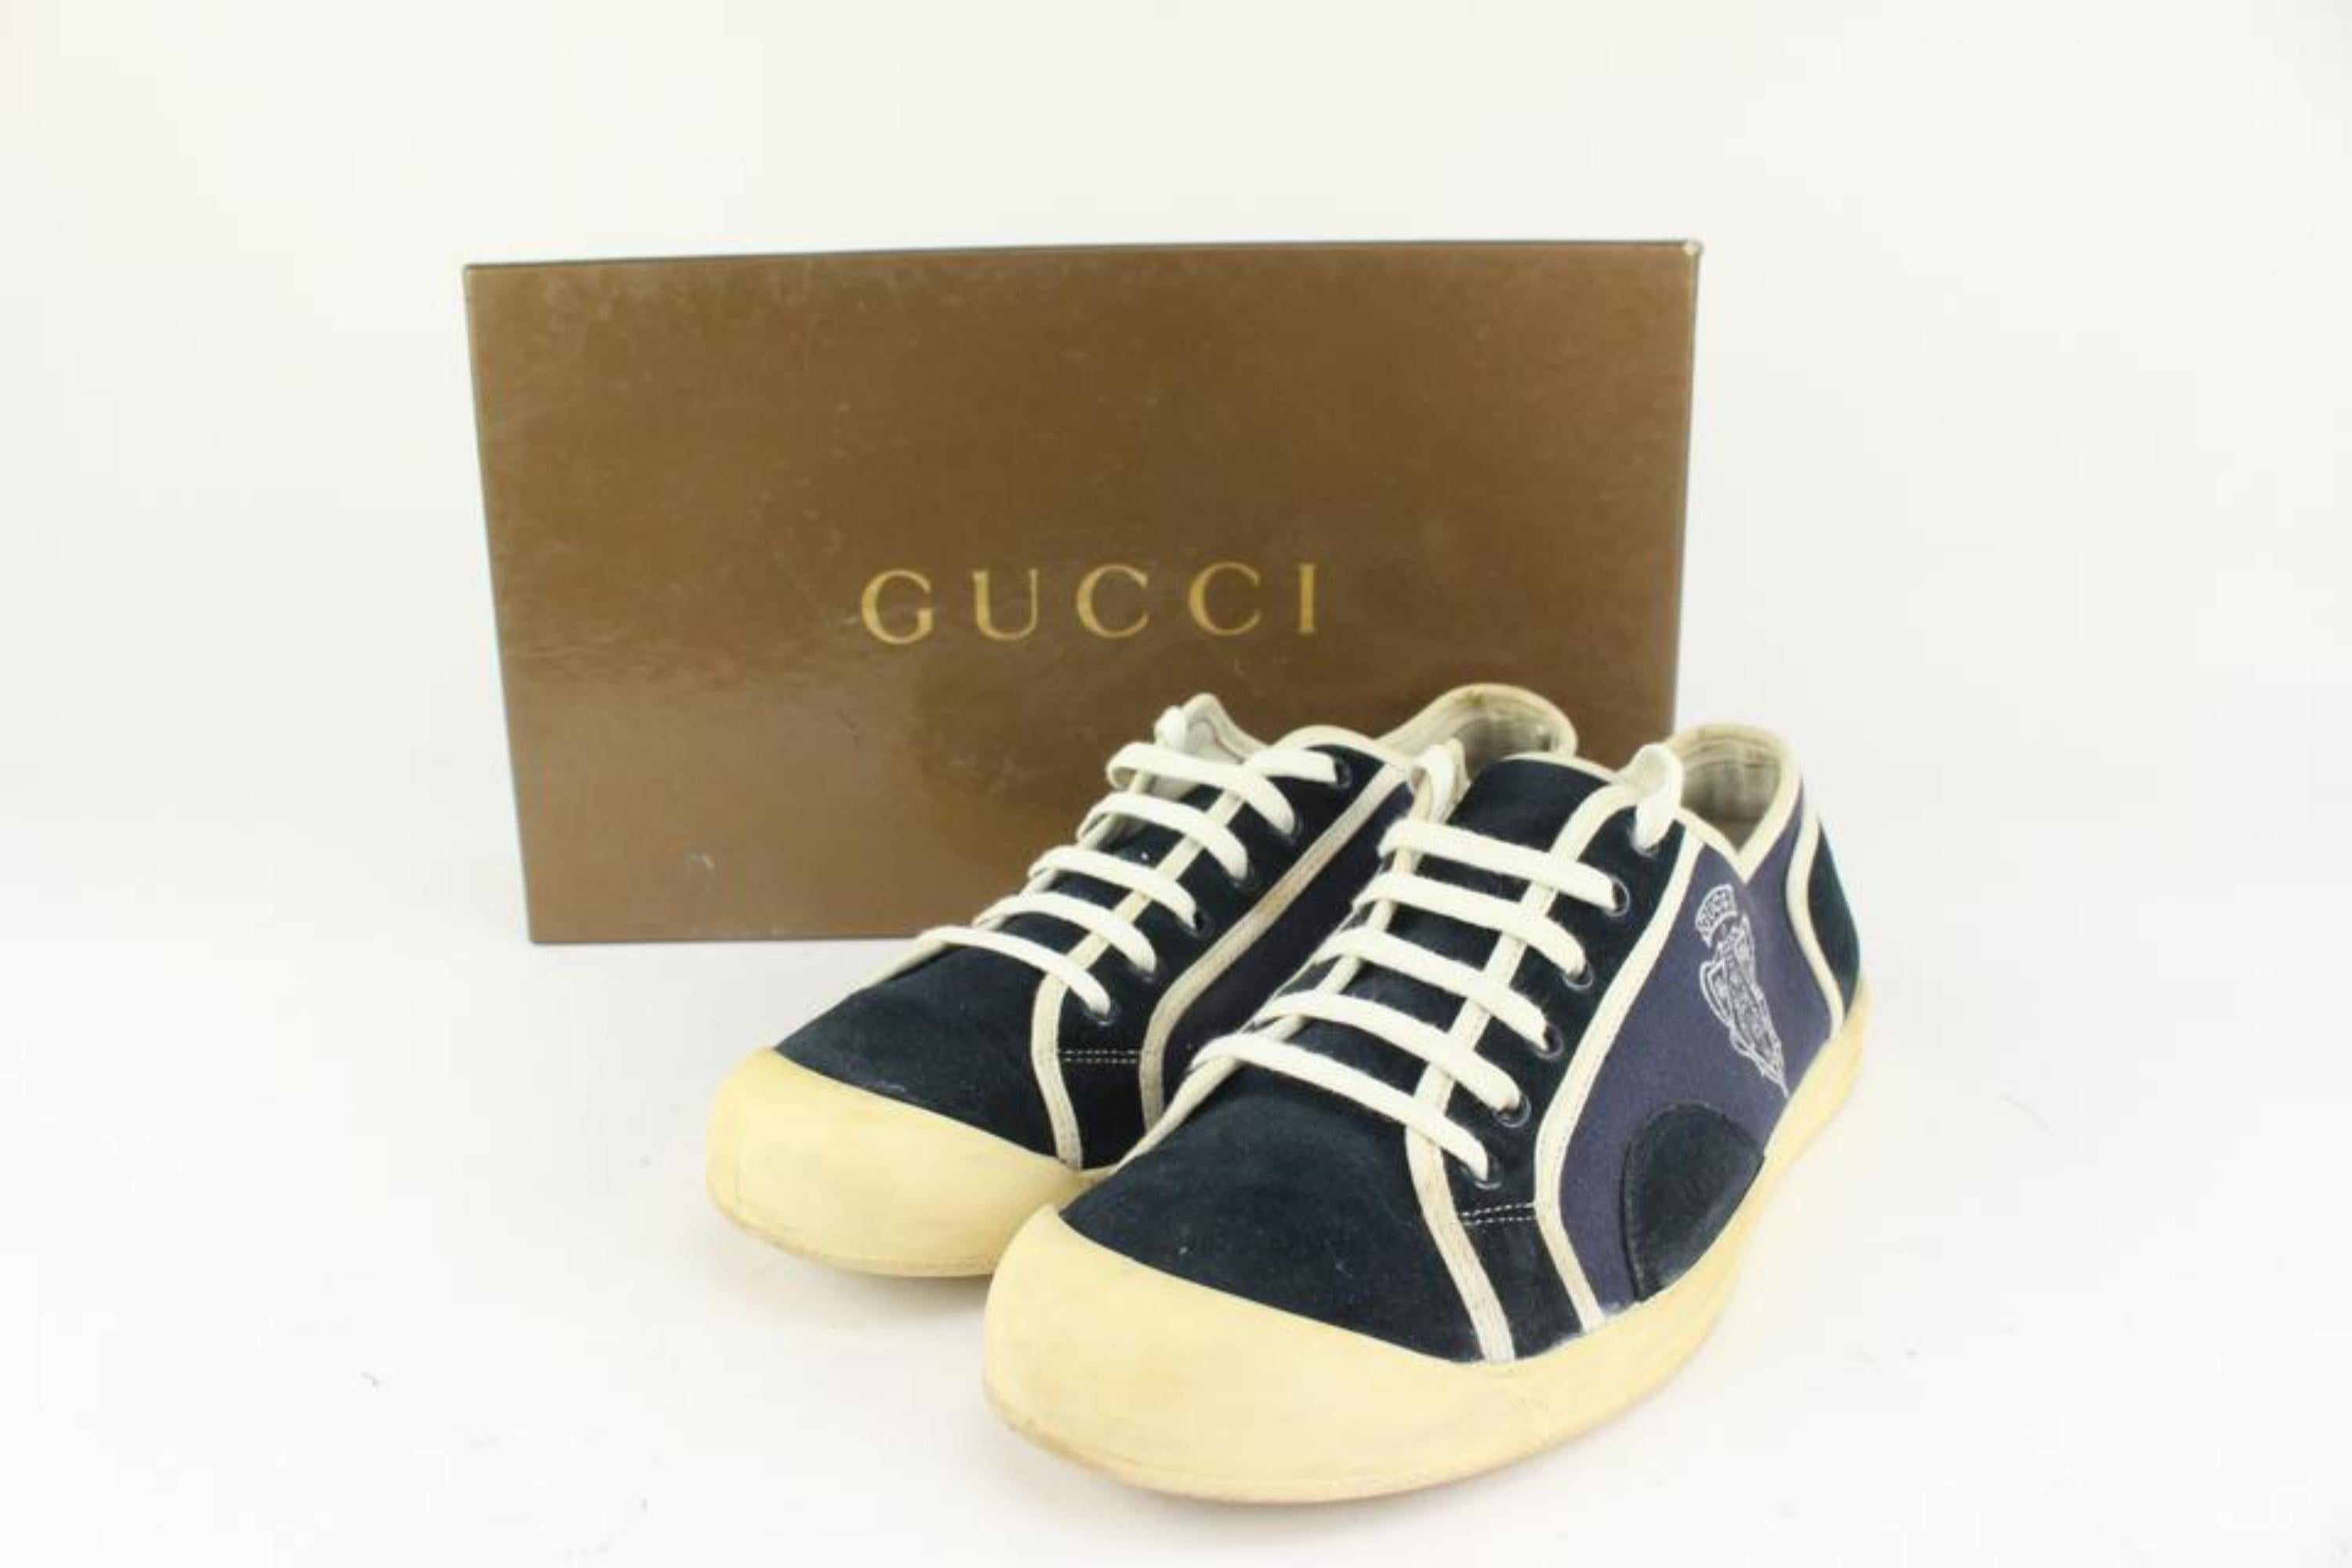 Gucci Mens 9 US Navy Suede Crest Logo GG Sneaker 126g8
Date Code/Serial Number: 190260
Made In: Italy
Measurements: Length:  11.5